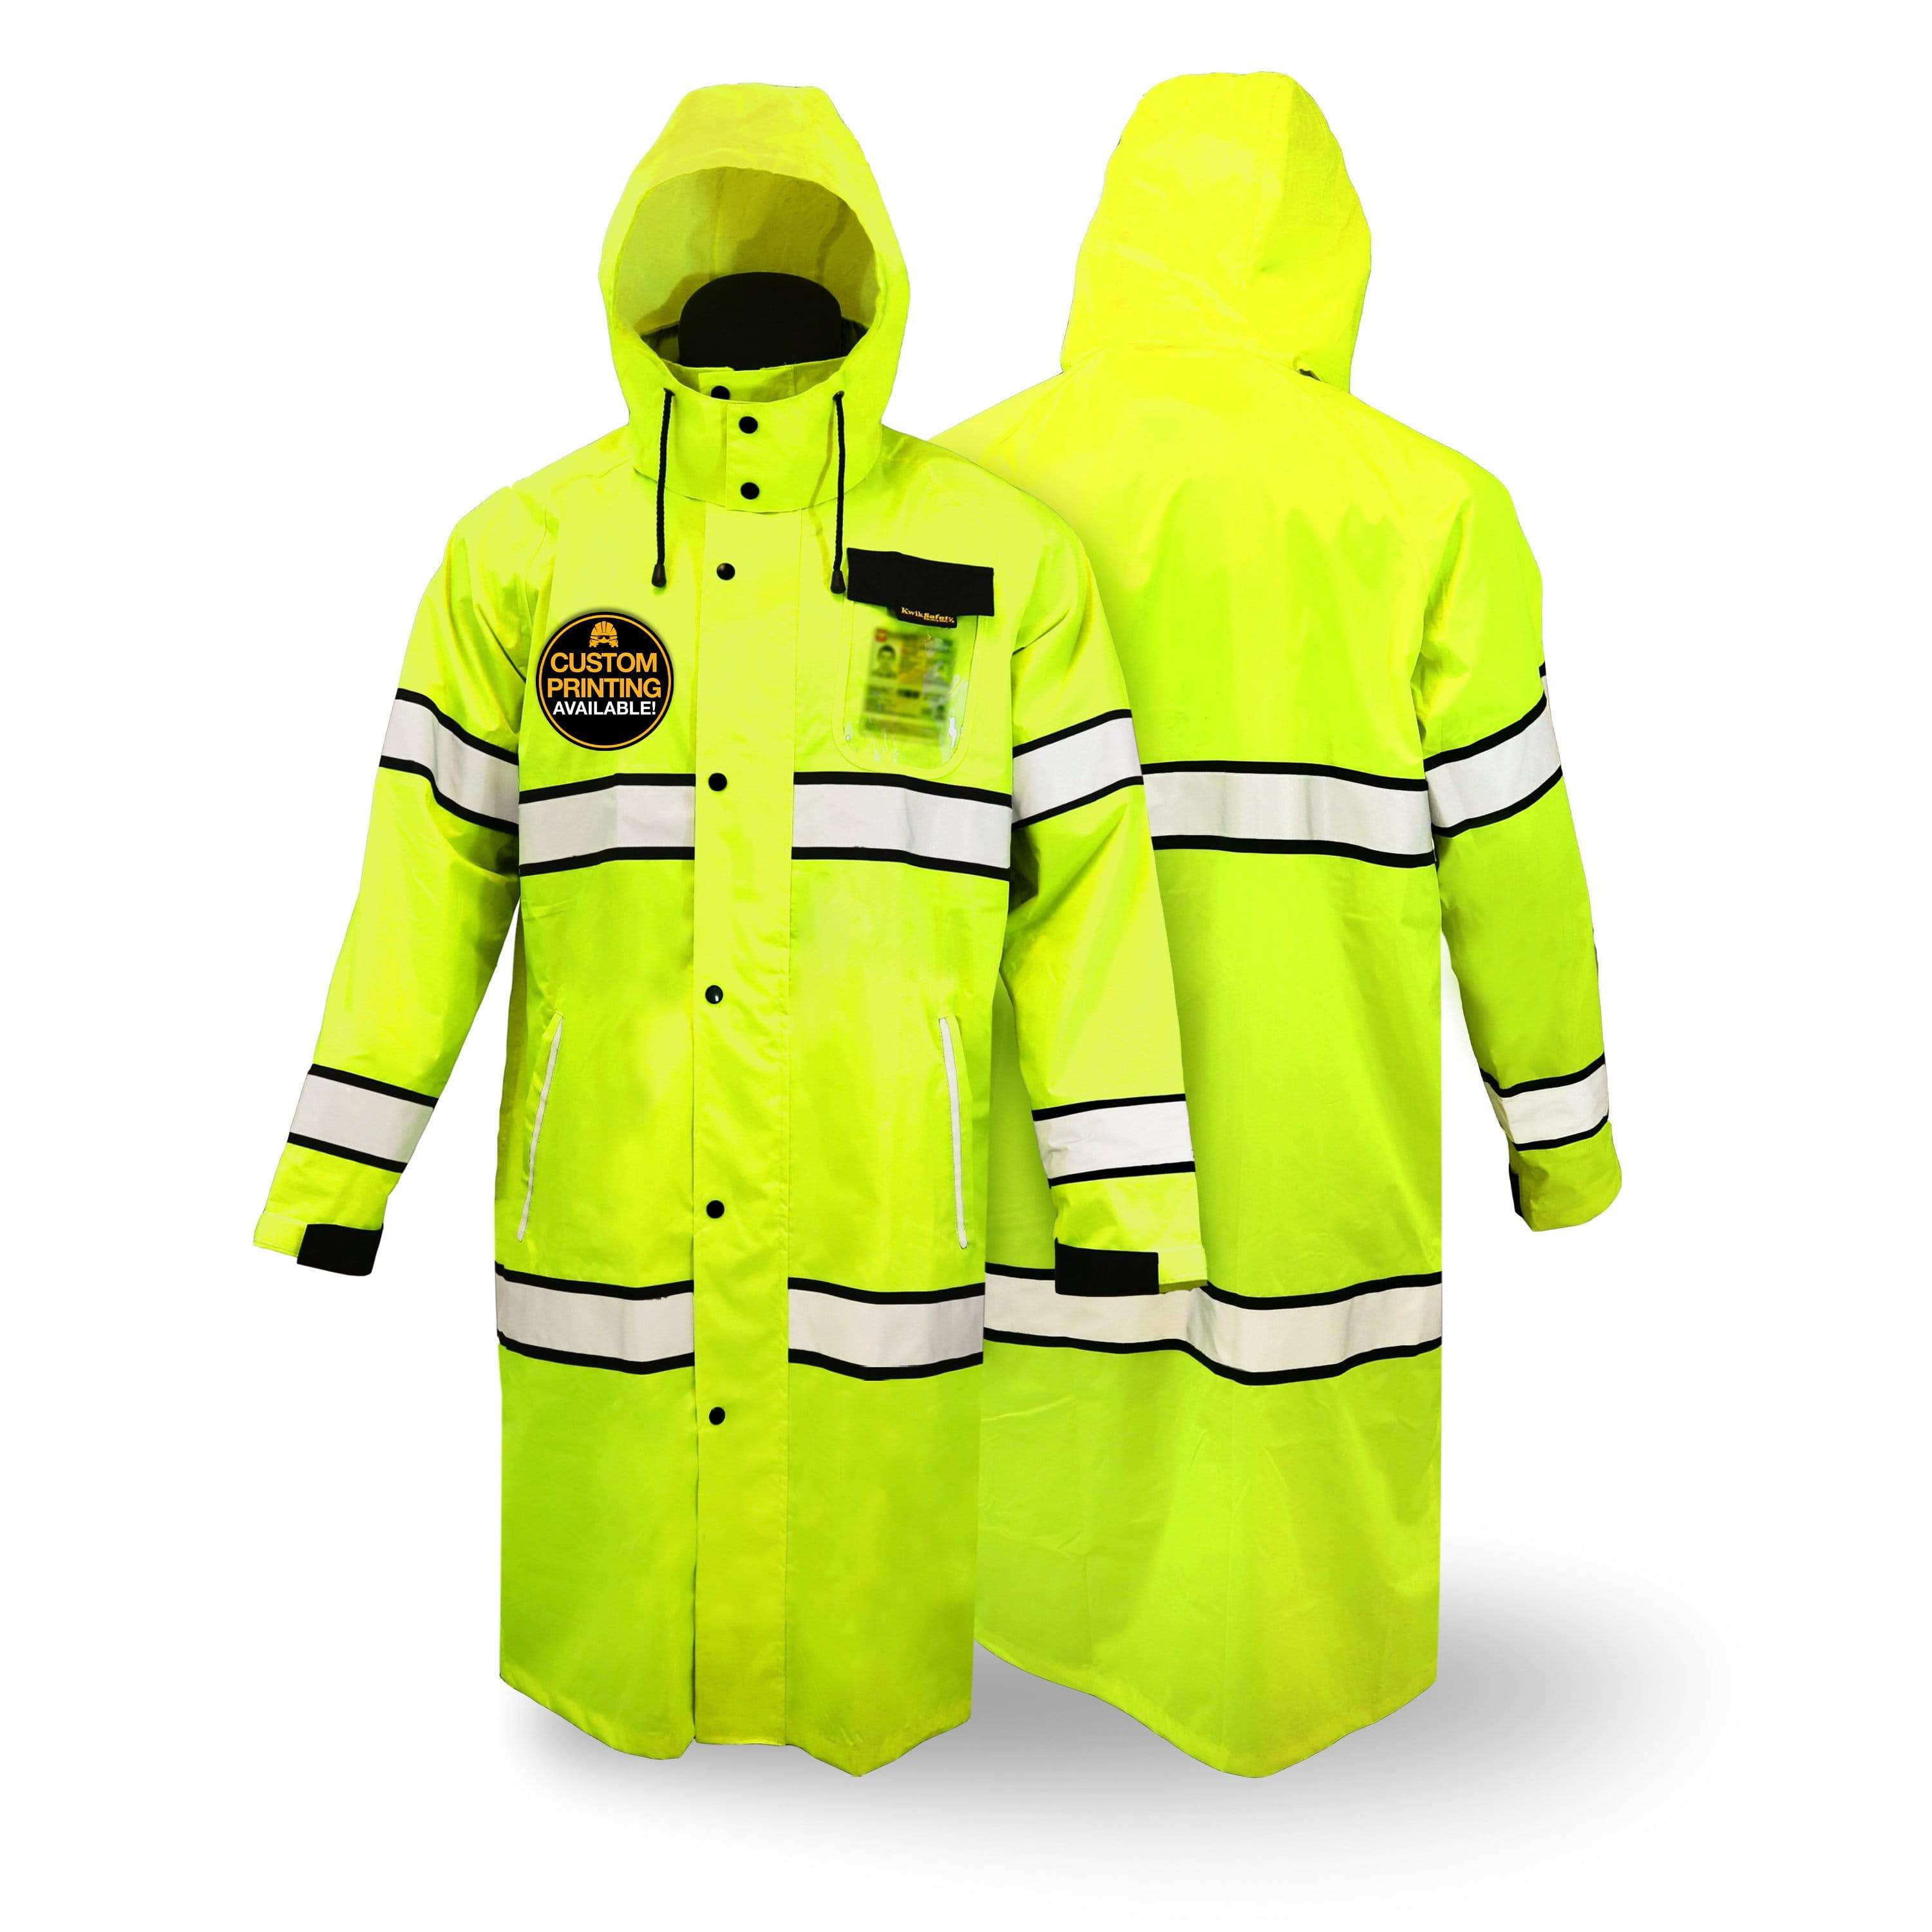 KwikSafety (Charlotte, NC) Torrent Class 3 Safety Trench Coat | High Visibility Waterproof Windproof Safety Rain Jacket | Hi Vis Reflective ANSI Work